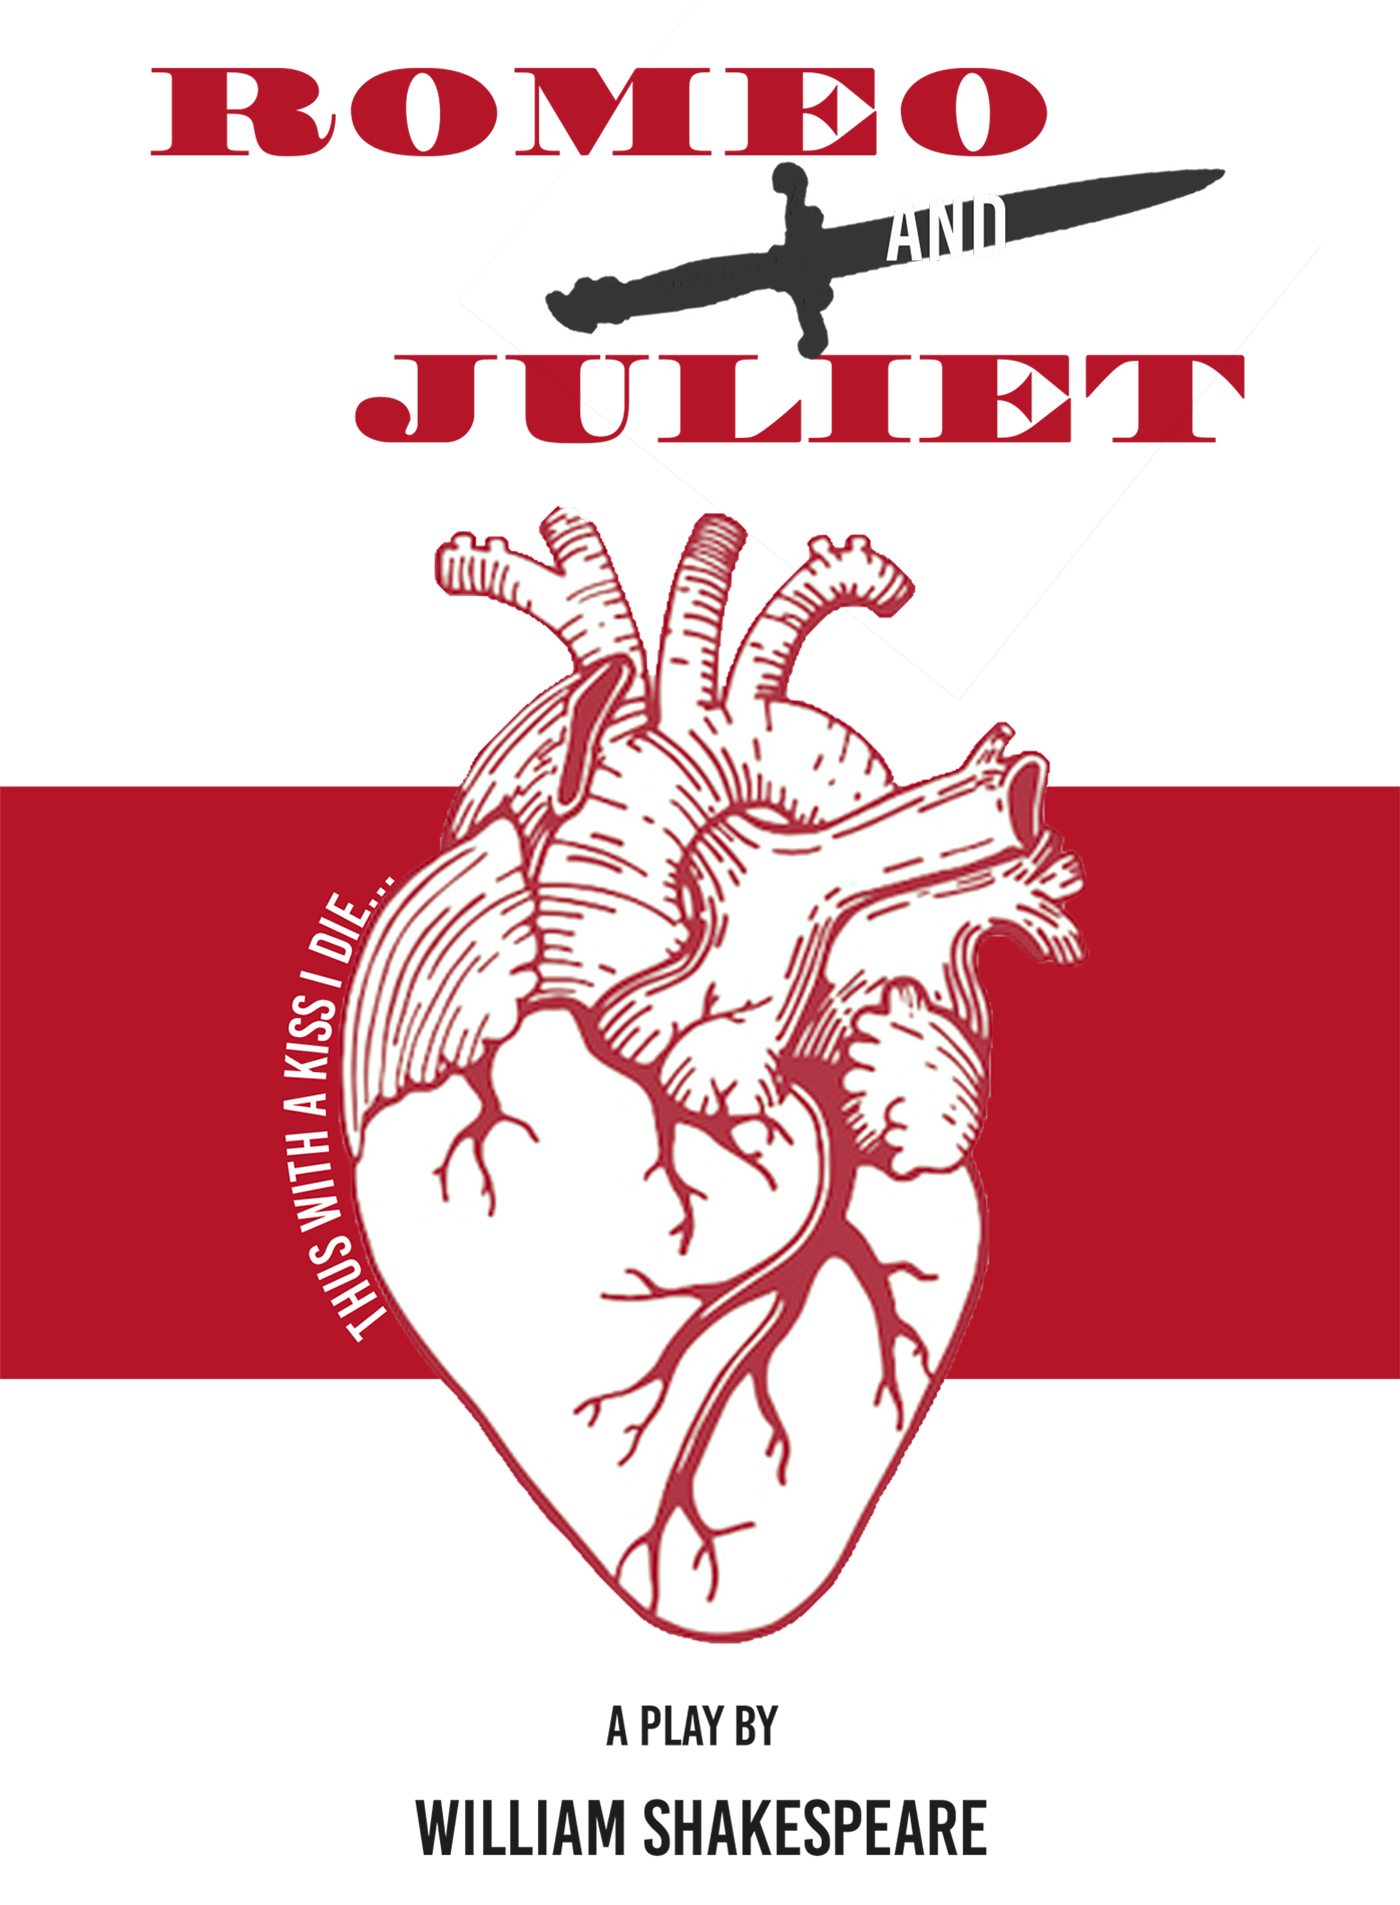 Romeo and Juliet cover with image of a red anatomical heart and dagger